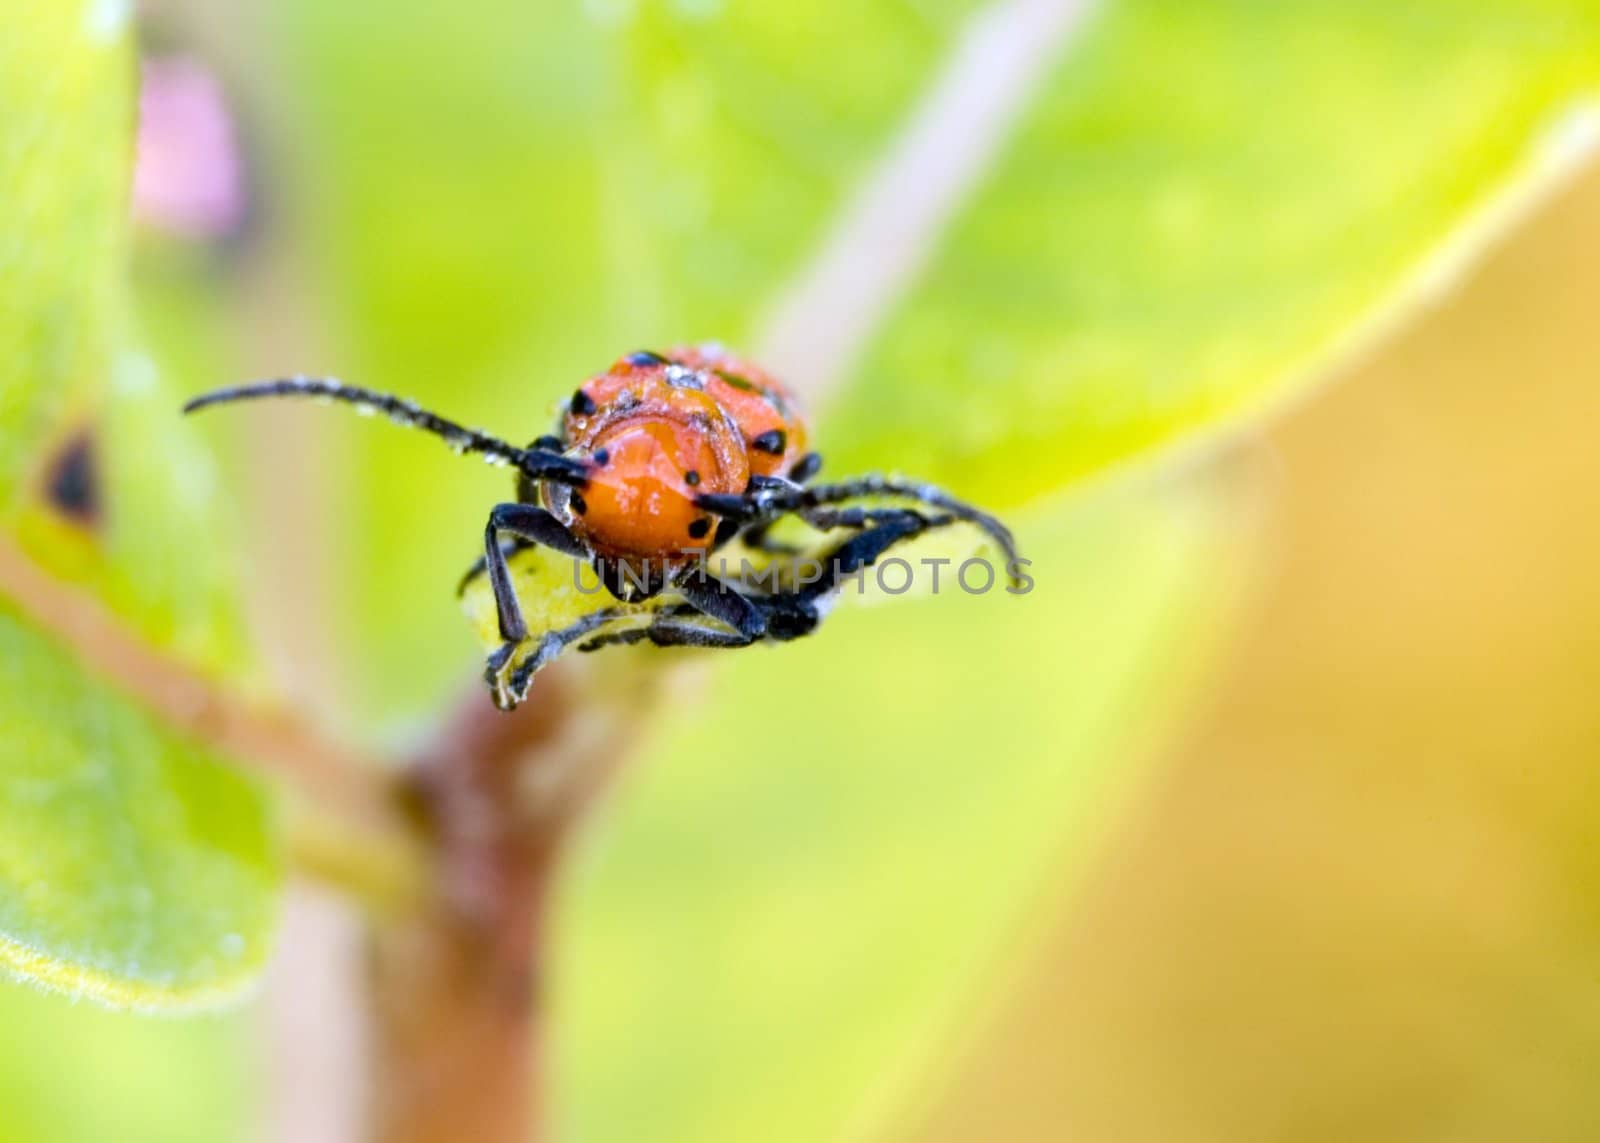 A red milkweed beetle perched on a plant leaf.